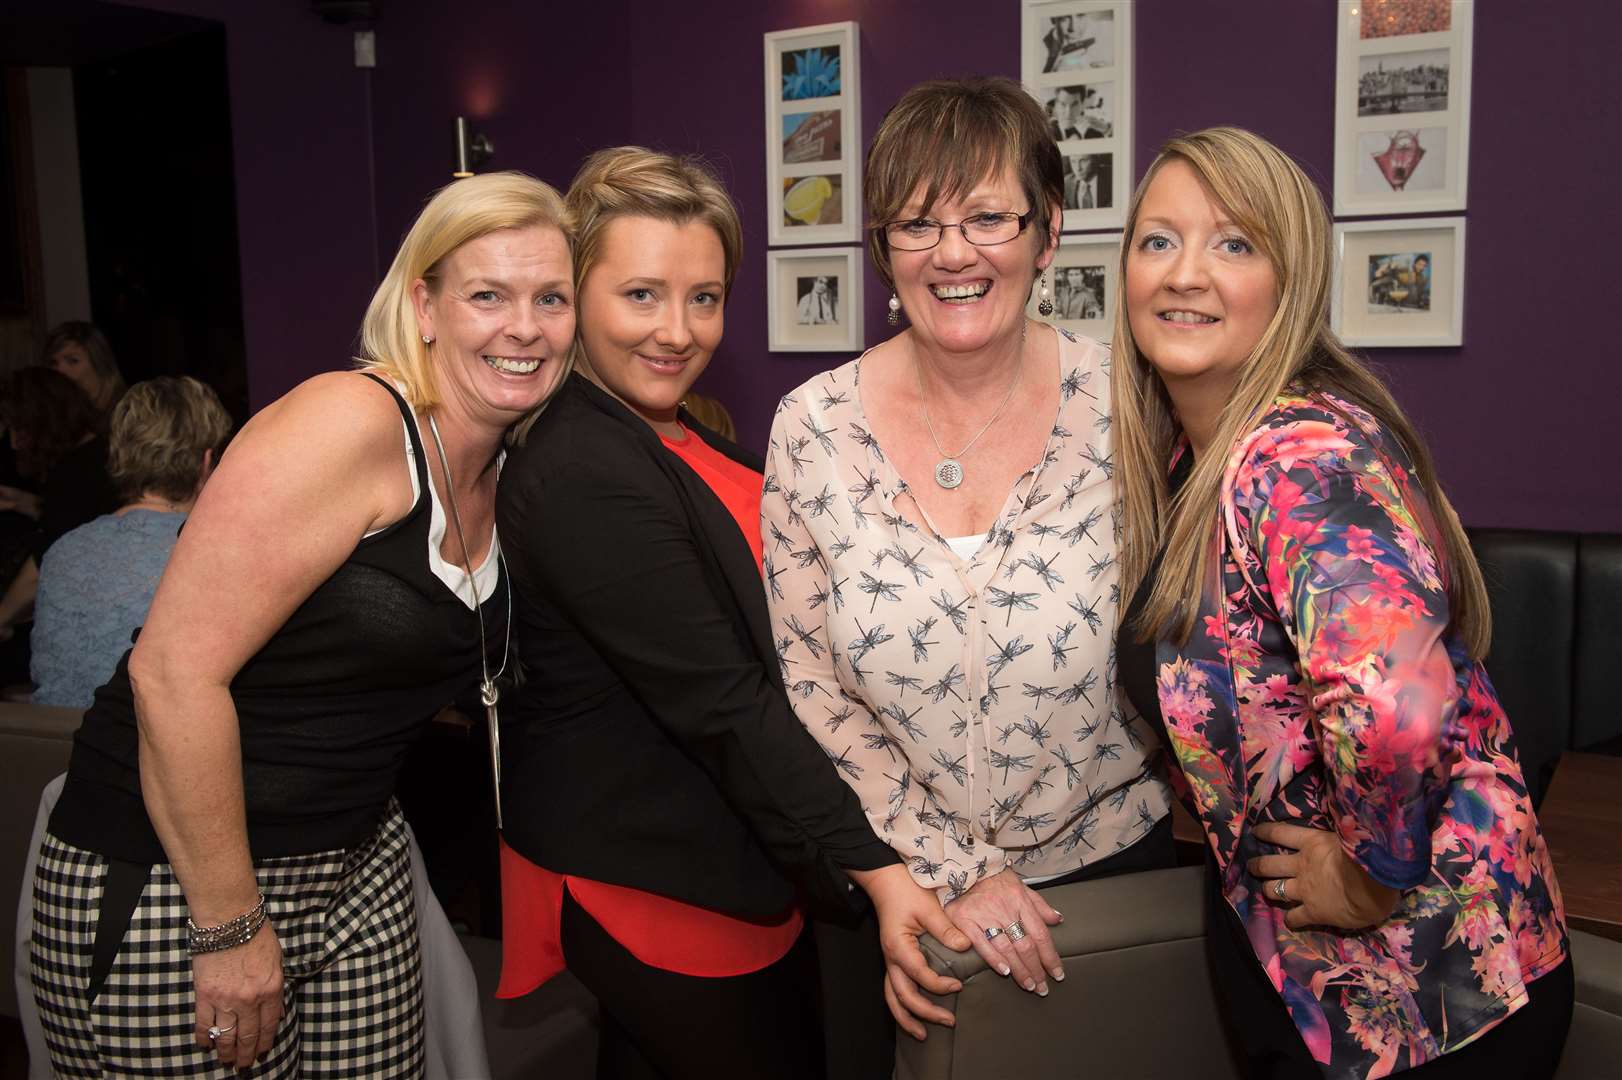 In BarOne for a girls night out are (left to right) Yvonne Robb, Sam Brock, Lorna Jackson and Laura Beaton. Picture: Callum Mackay.